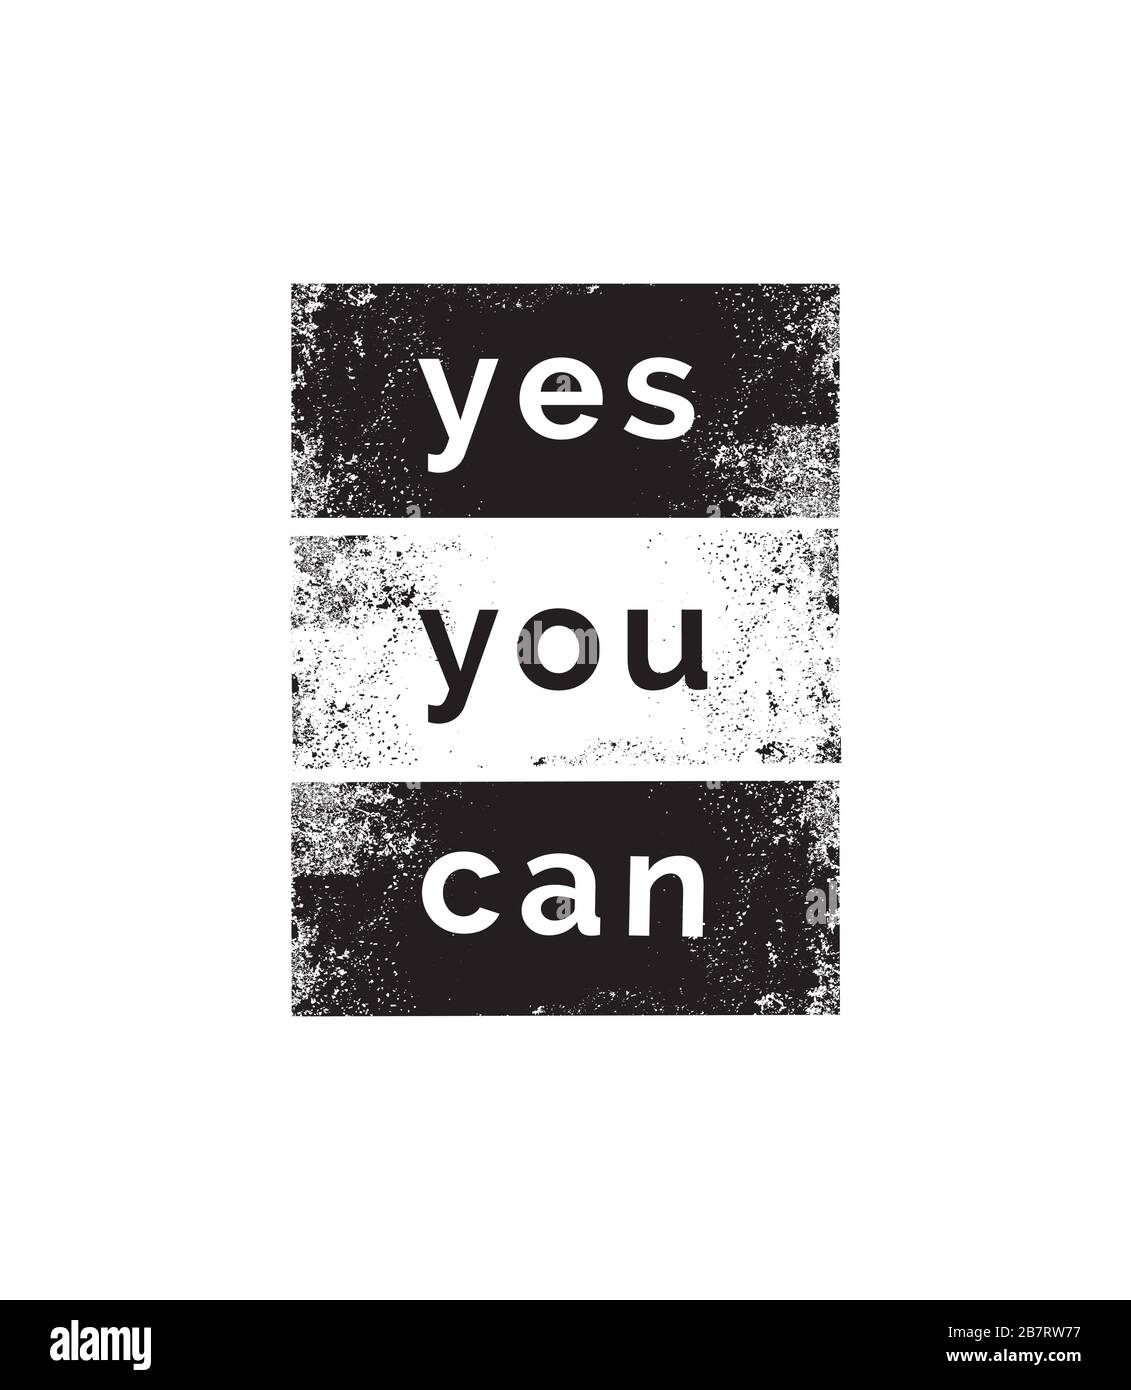 https://c8.alamy.com/comp/2B7RW77/yes-you-can-motivational-quotes-vector-illustration-2B7RW77.jpg